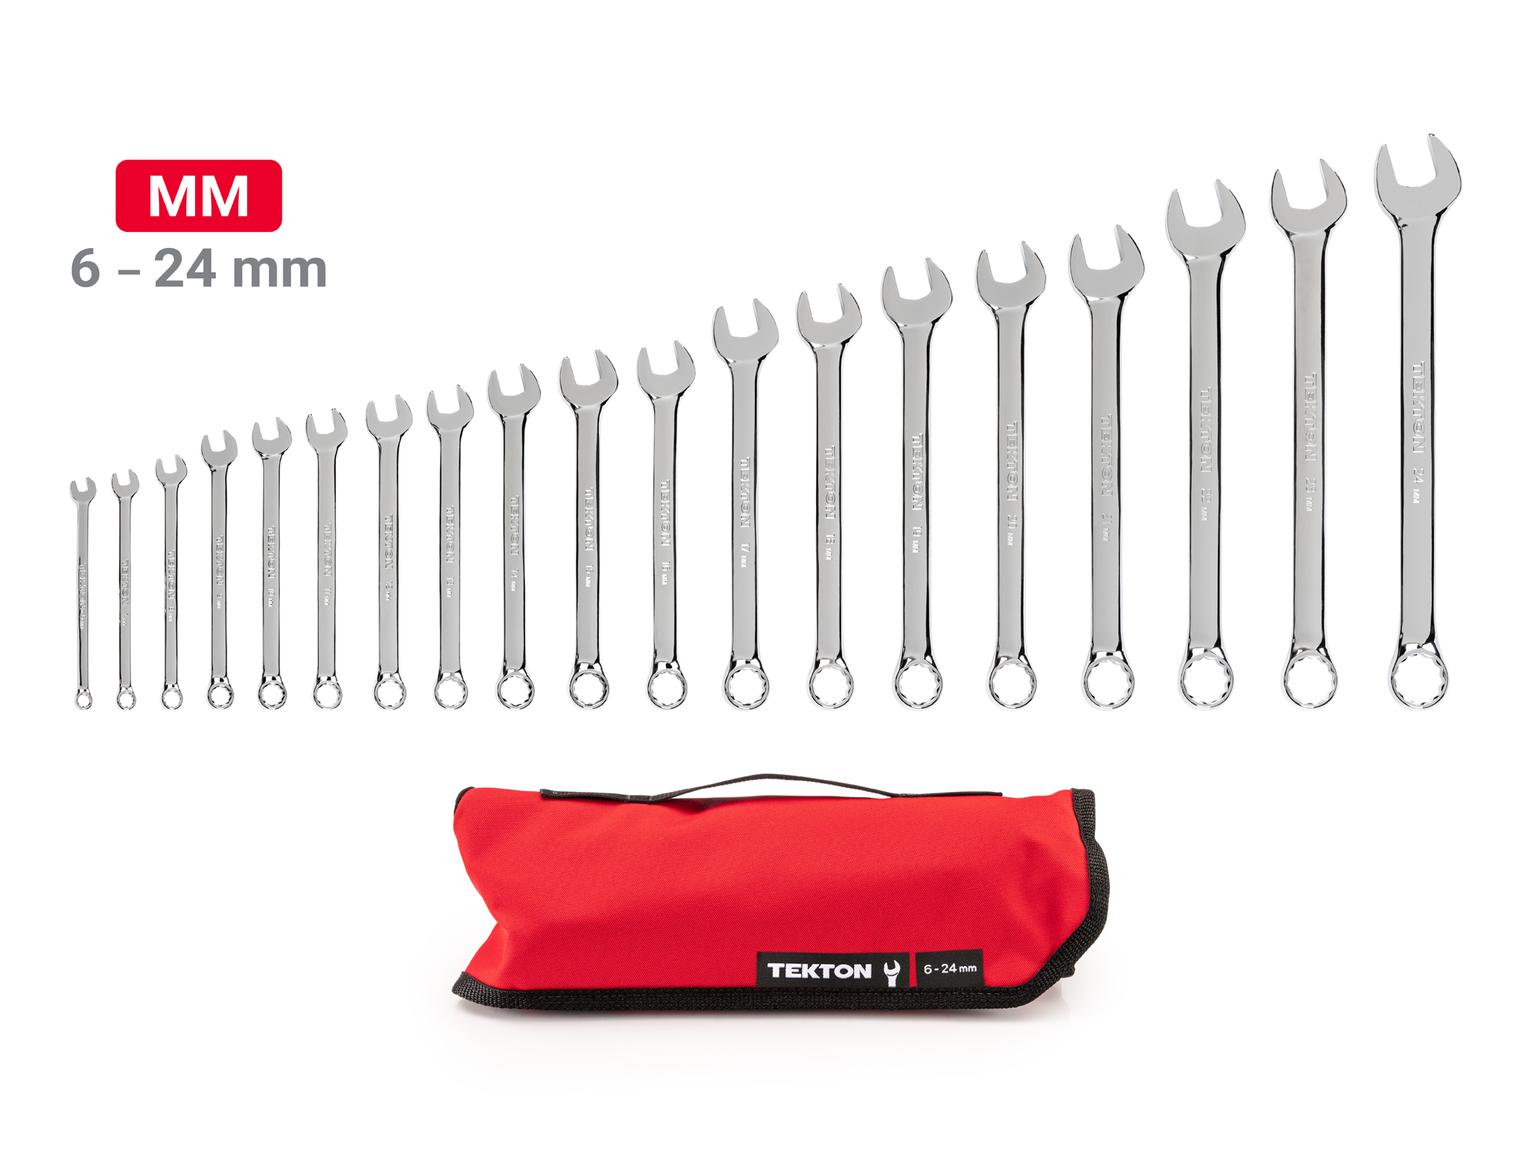 TEKTON WCB94202-T Combination Wrench Set with Pouch, 19-Piece (6 - 24 mm)